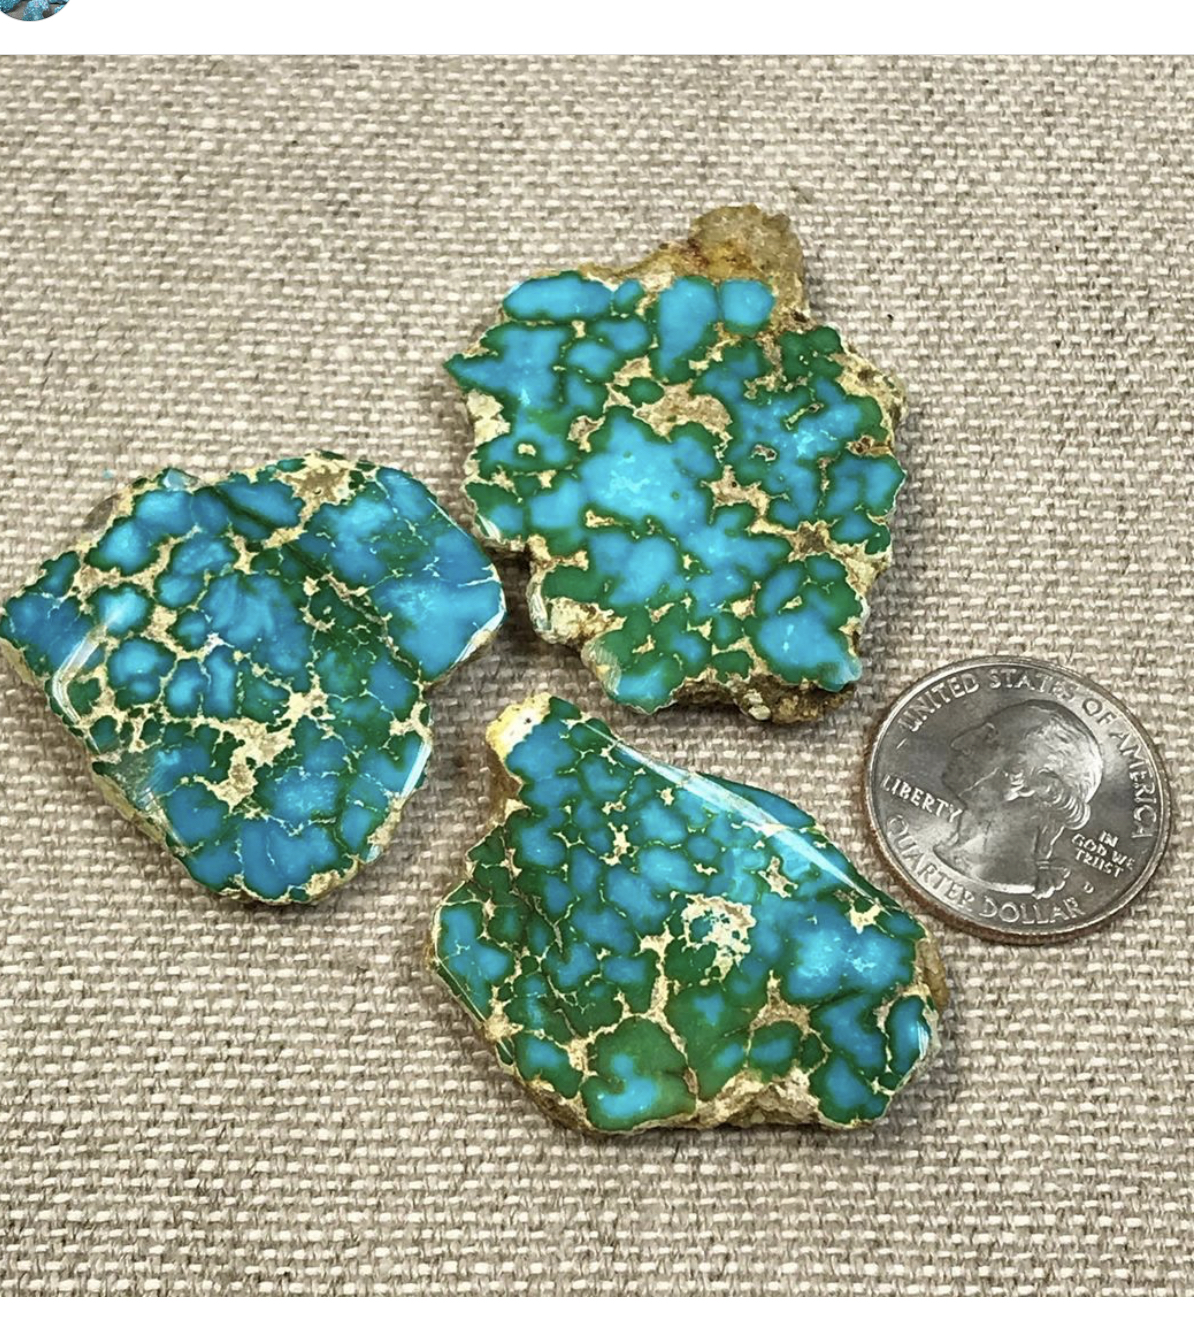 Sonoran Gold Turquoise rough